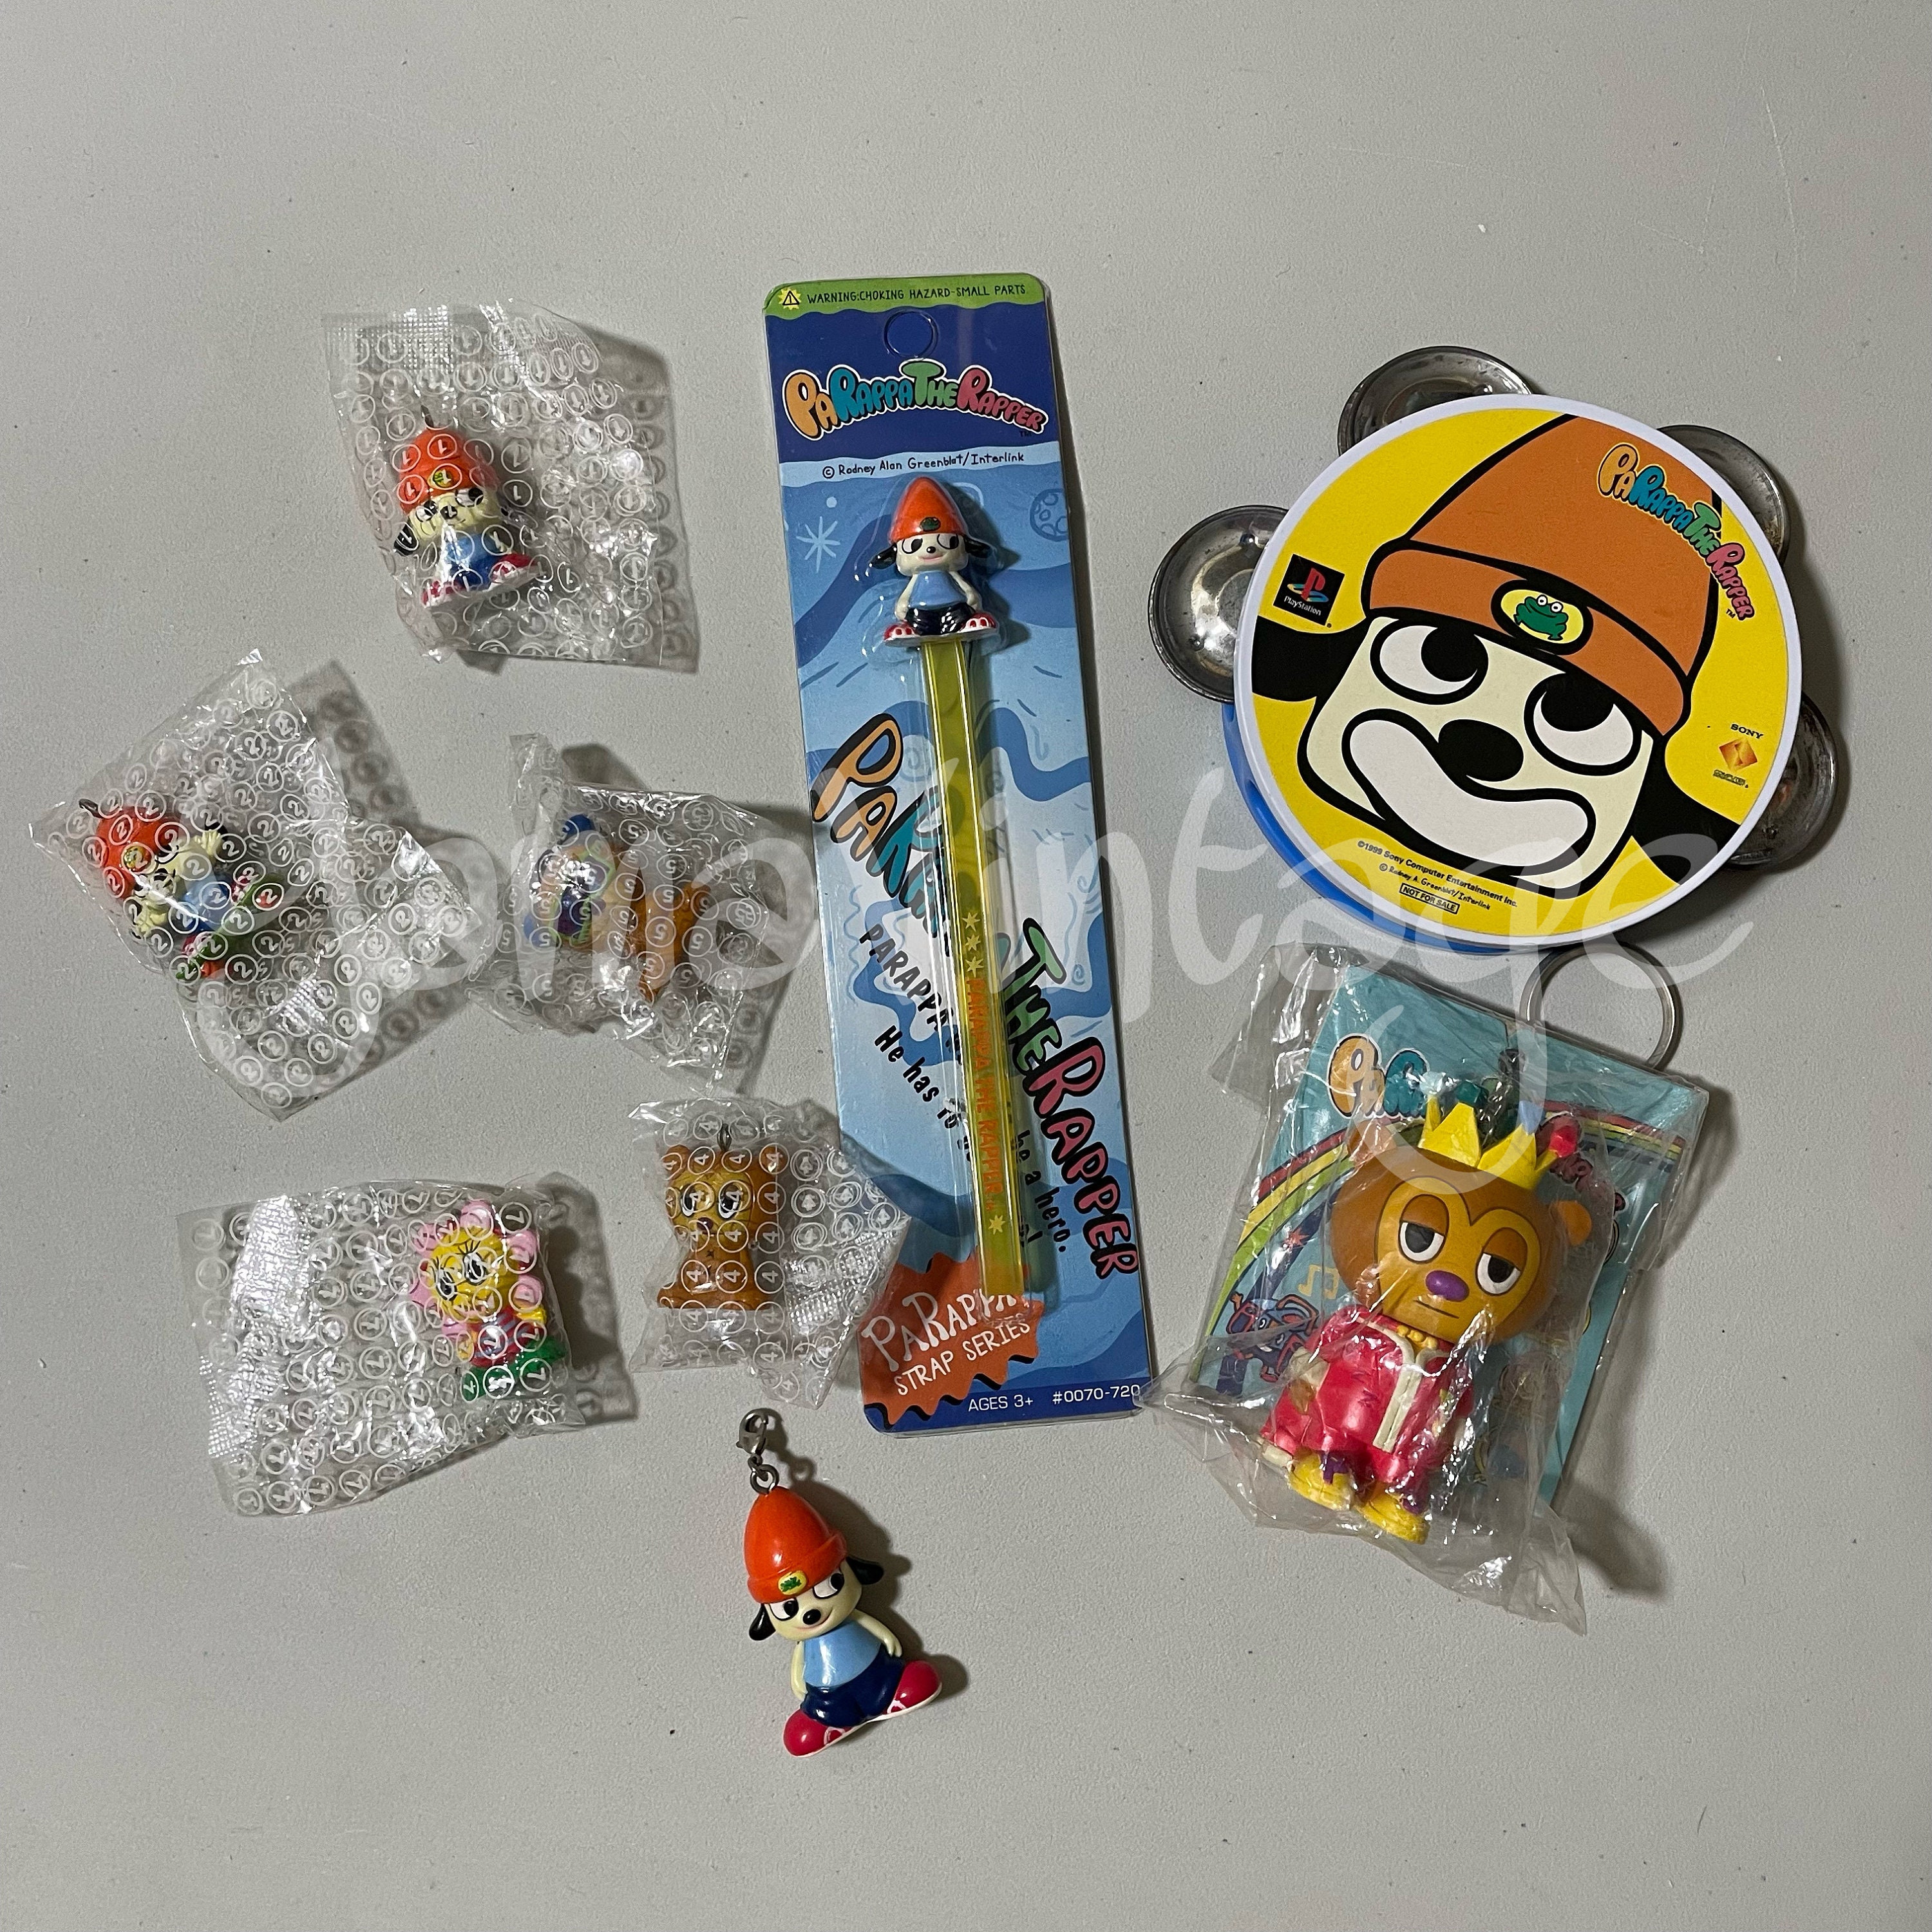 Rare PaRappa the Rapper Figure and key chain Toy 6 set in box Sunny Funny